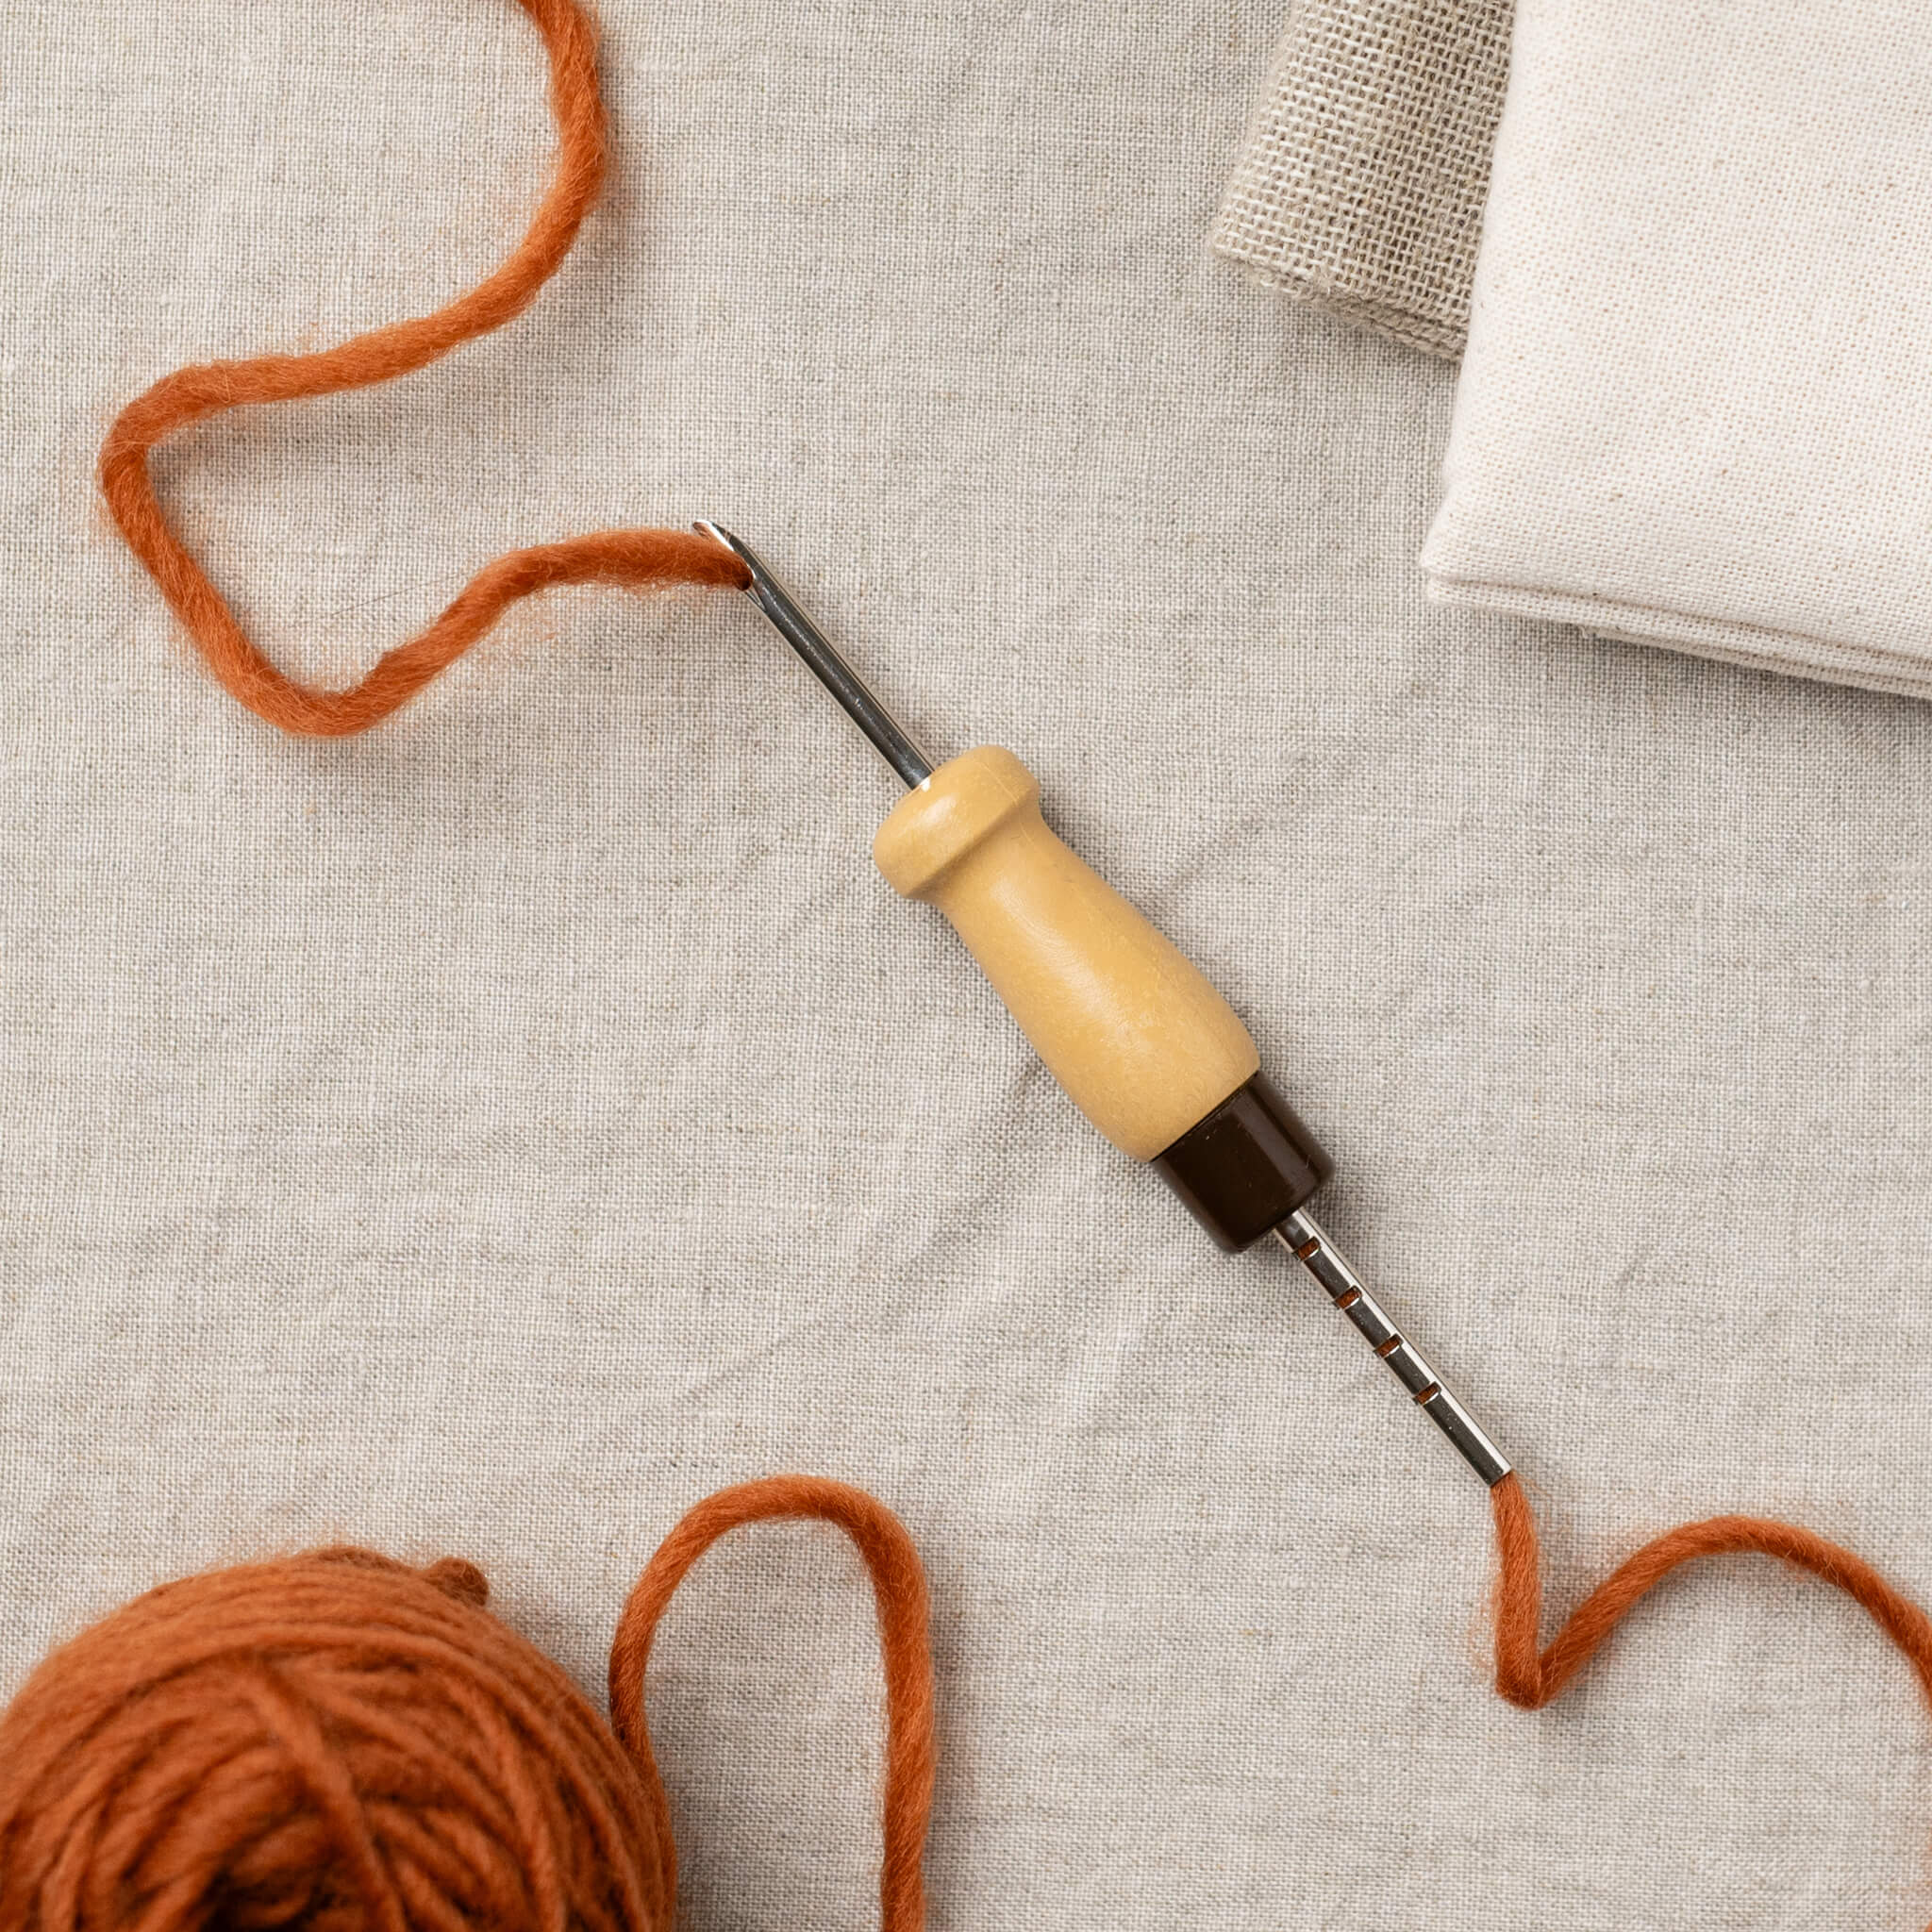 Lavor Punch Needle Holder and Threader, Knitting Book